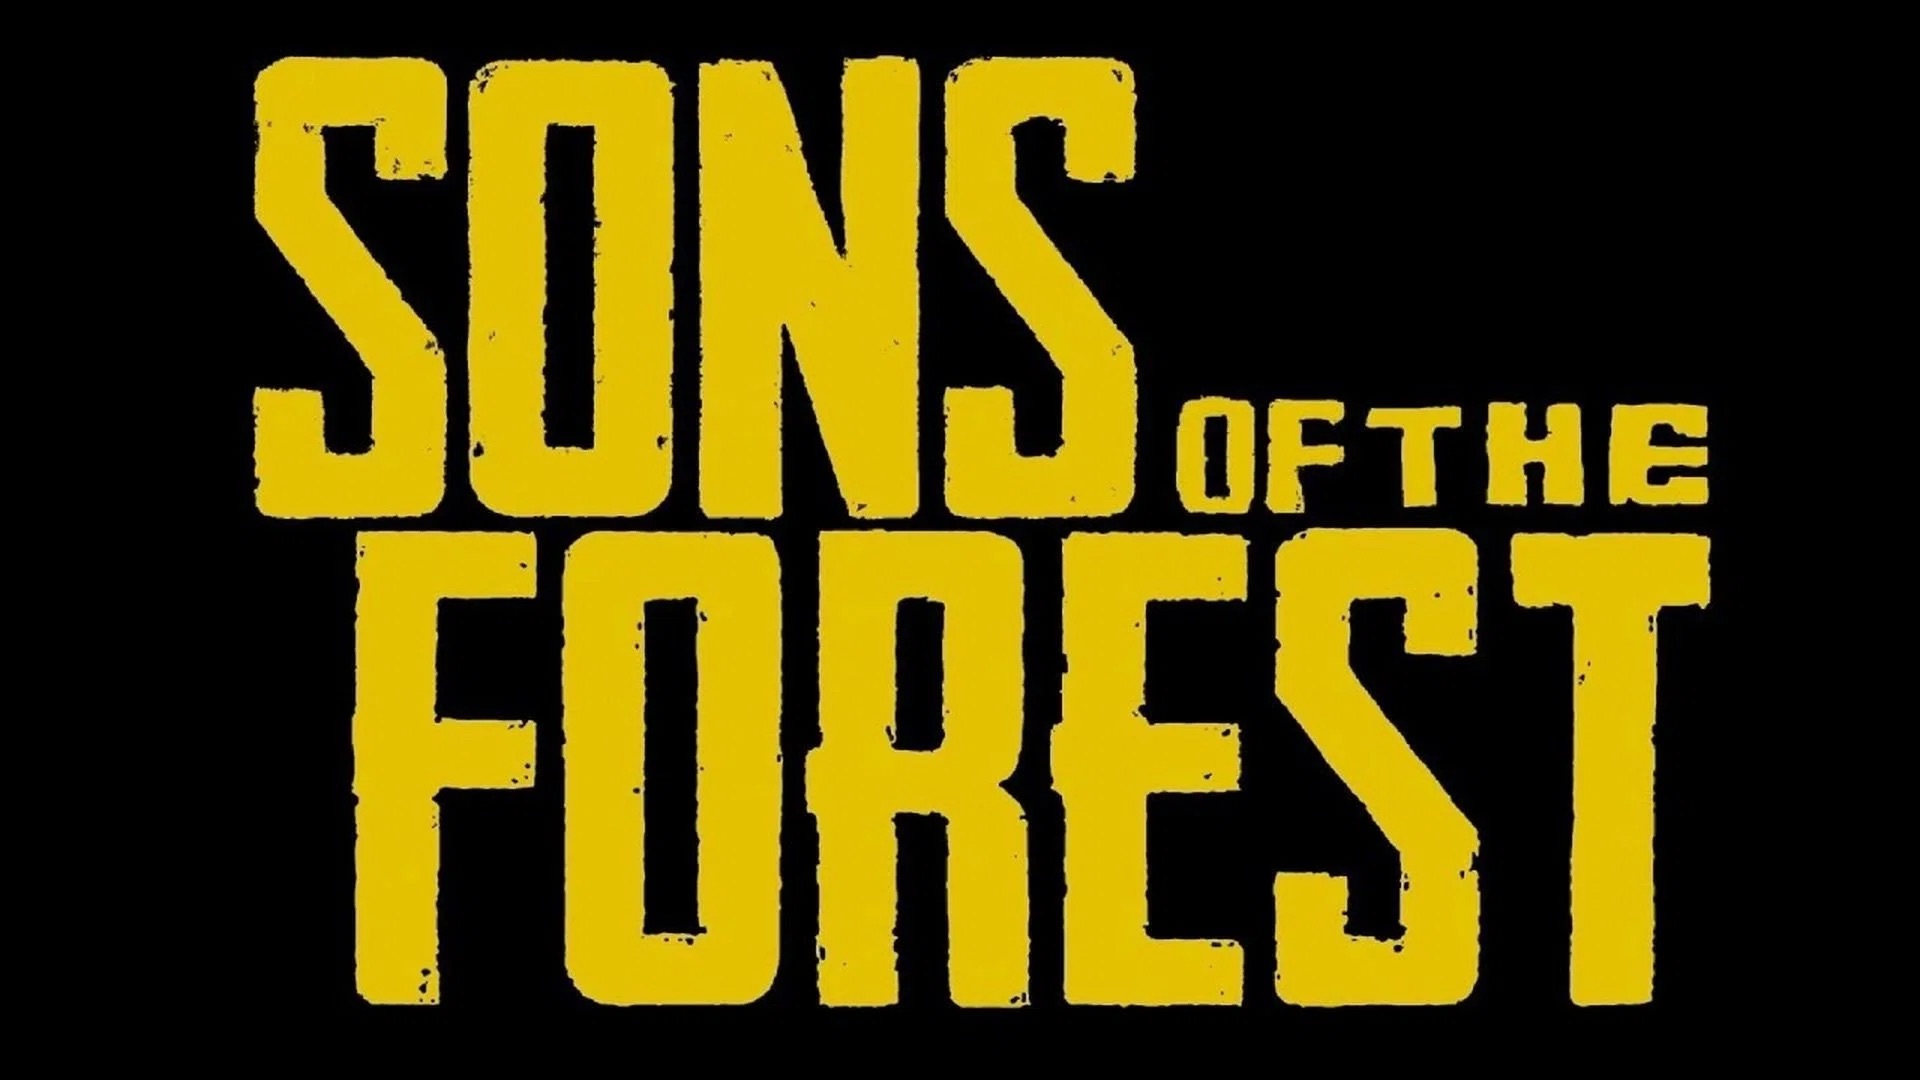 Too Ambitious, Endnight Games Delays Launch Of Sons Of The Forest Until  October